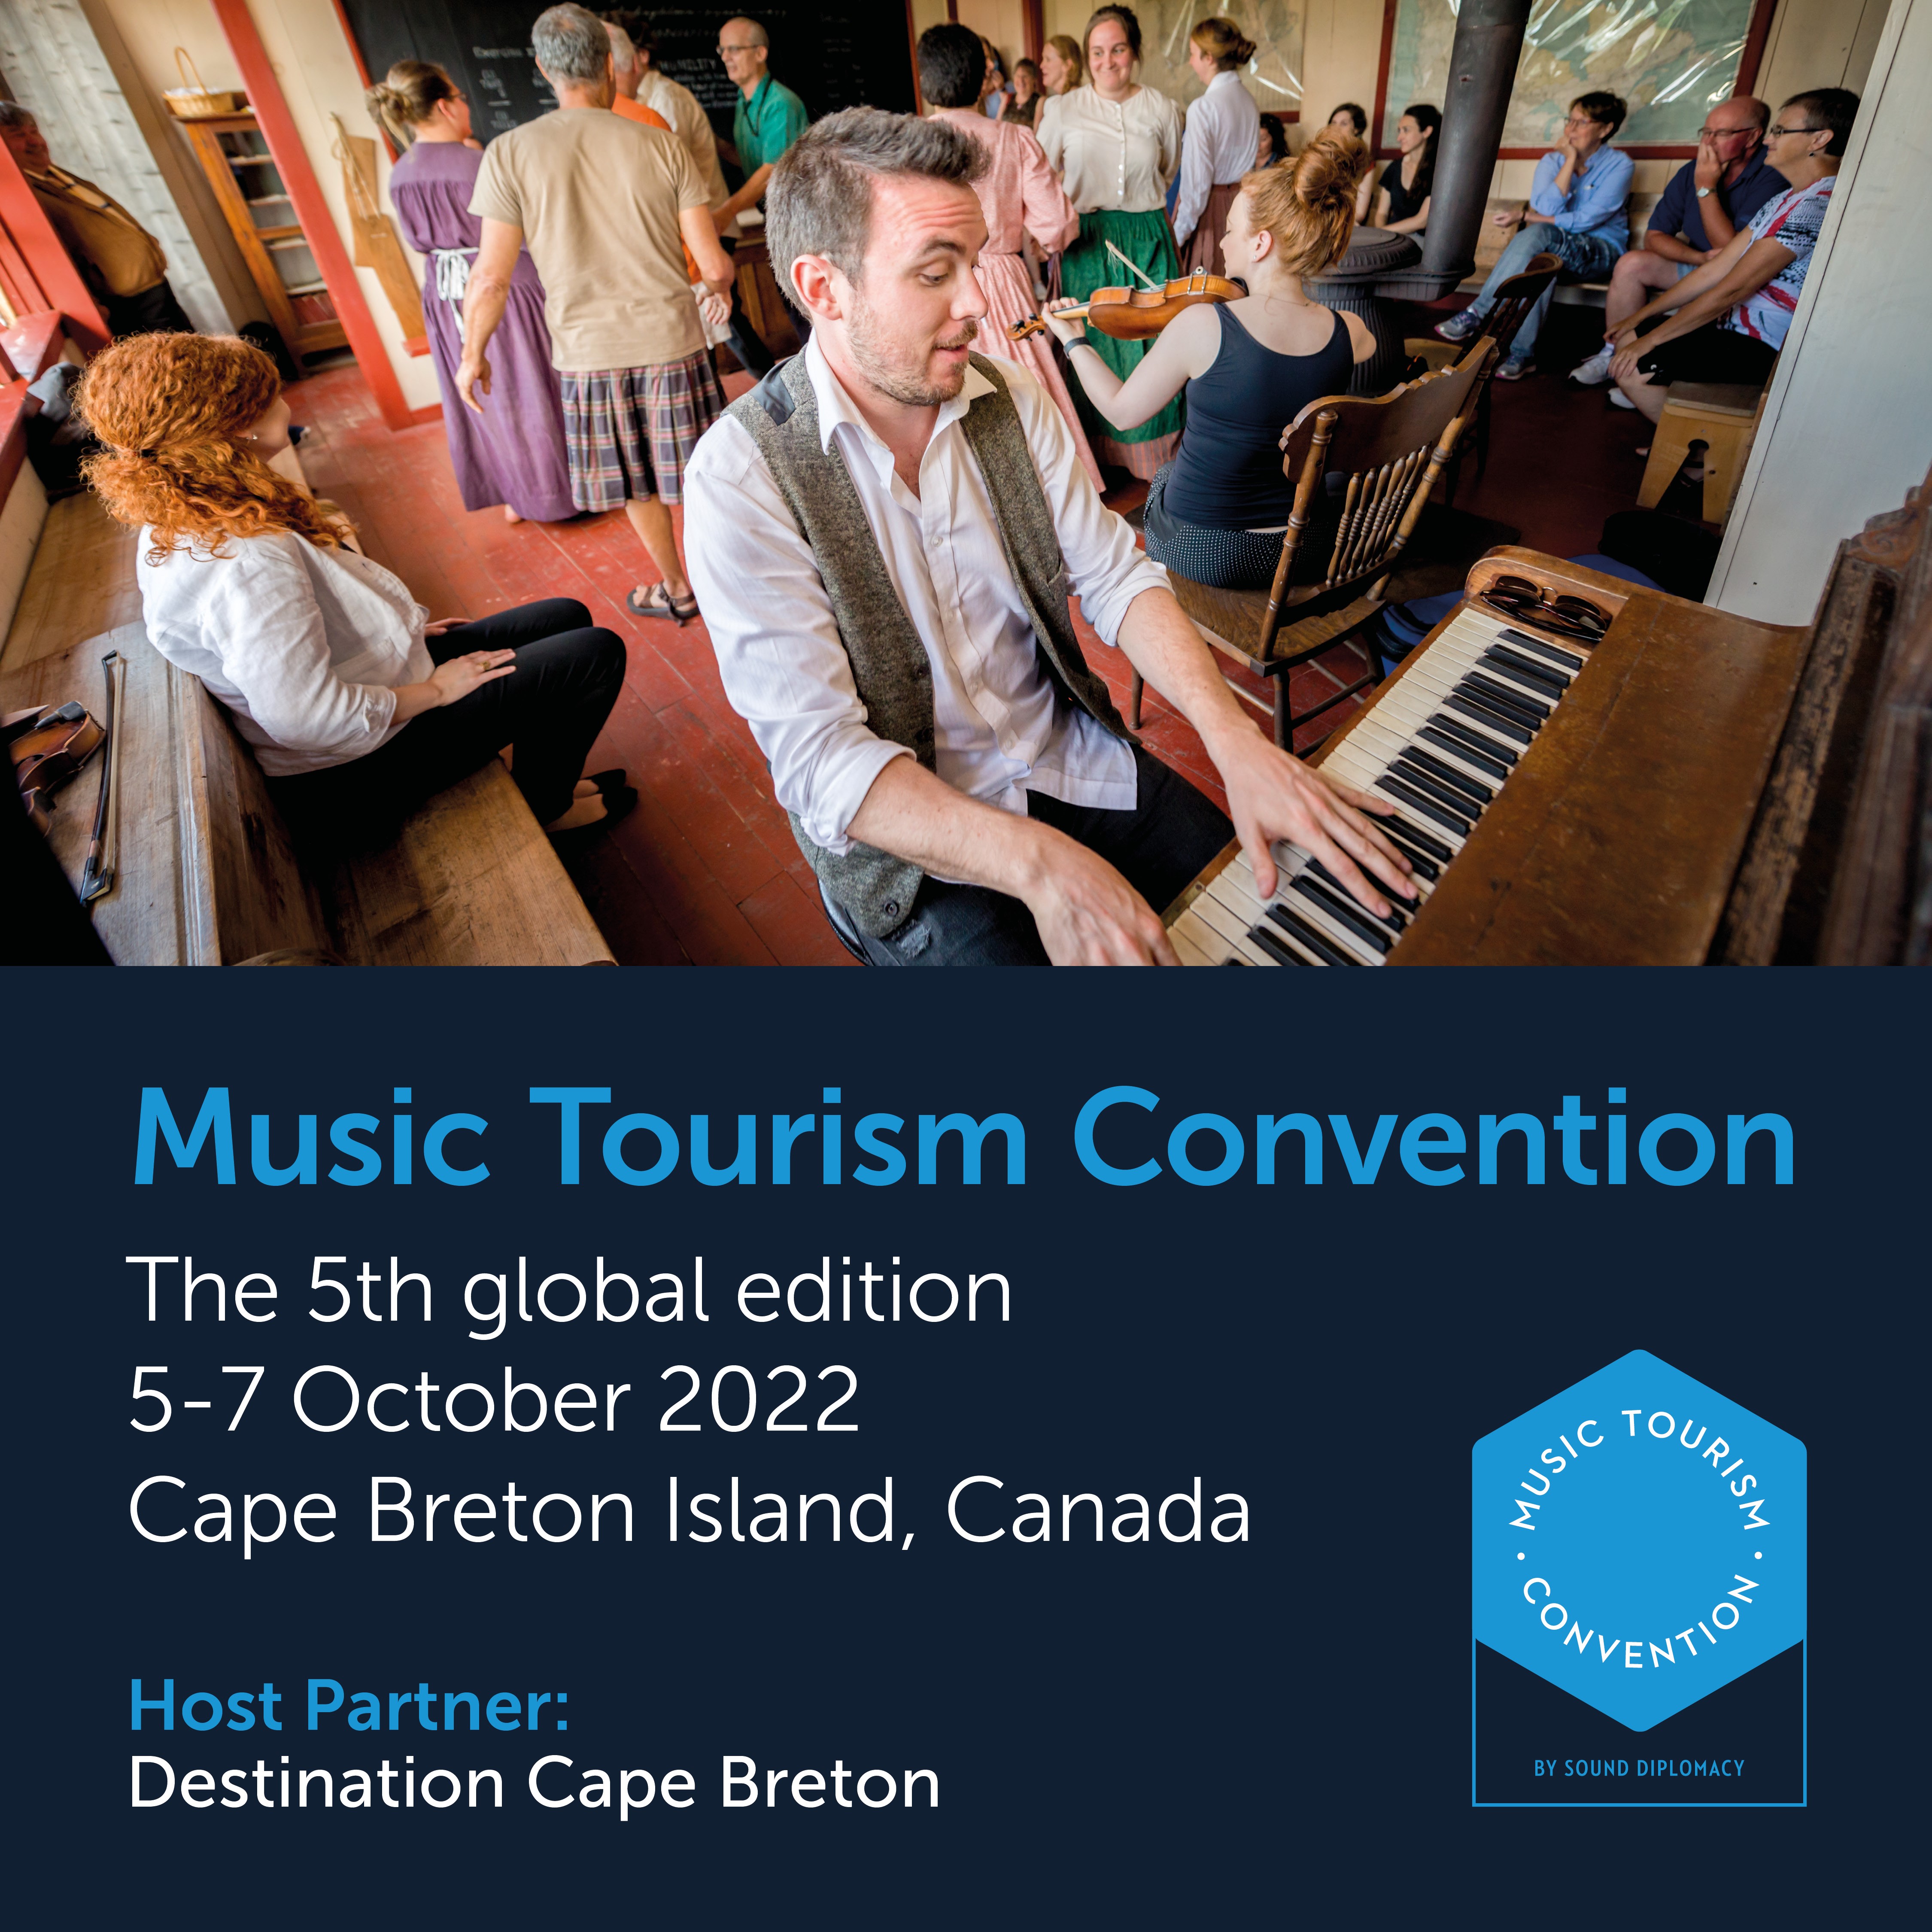 Music Tourism Convention hosted by Destination Cape Breton Association October 5-7, 2022. Image of a group dancing while a man plays piano.